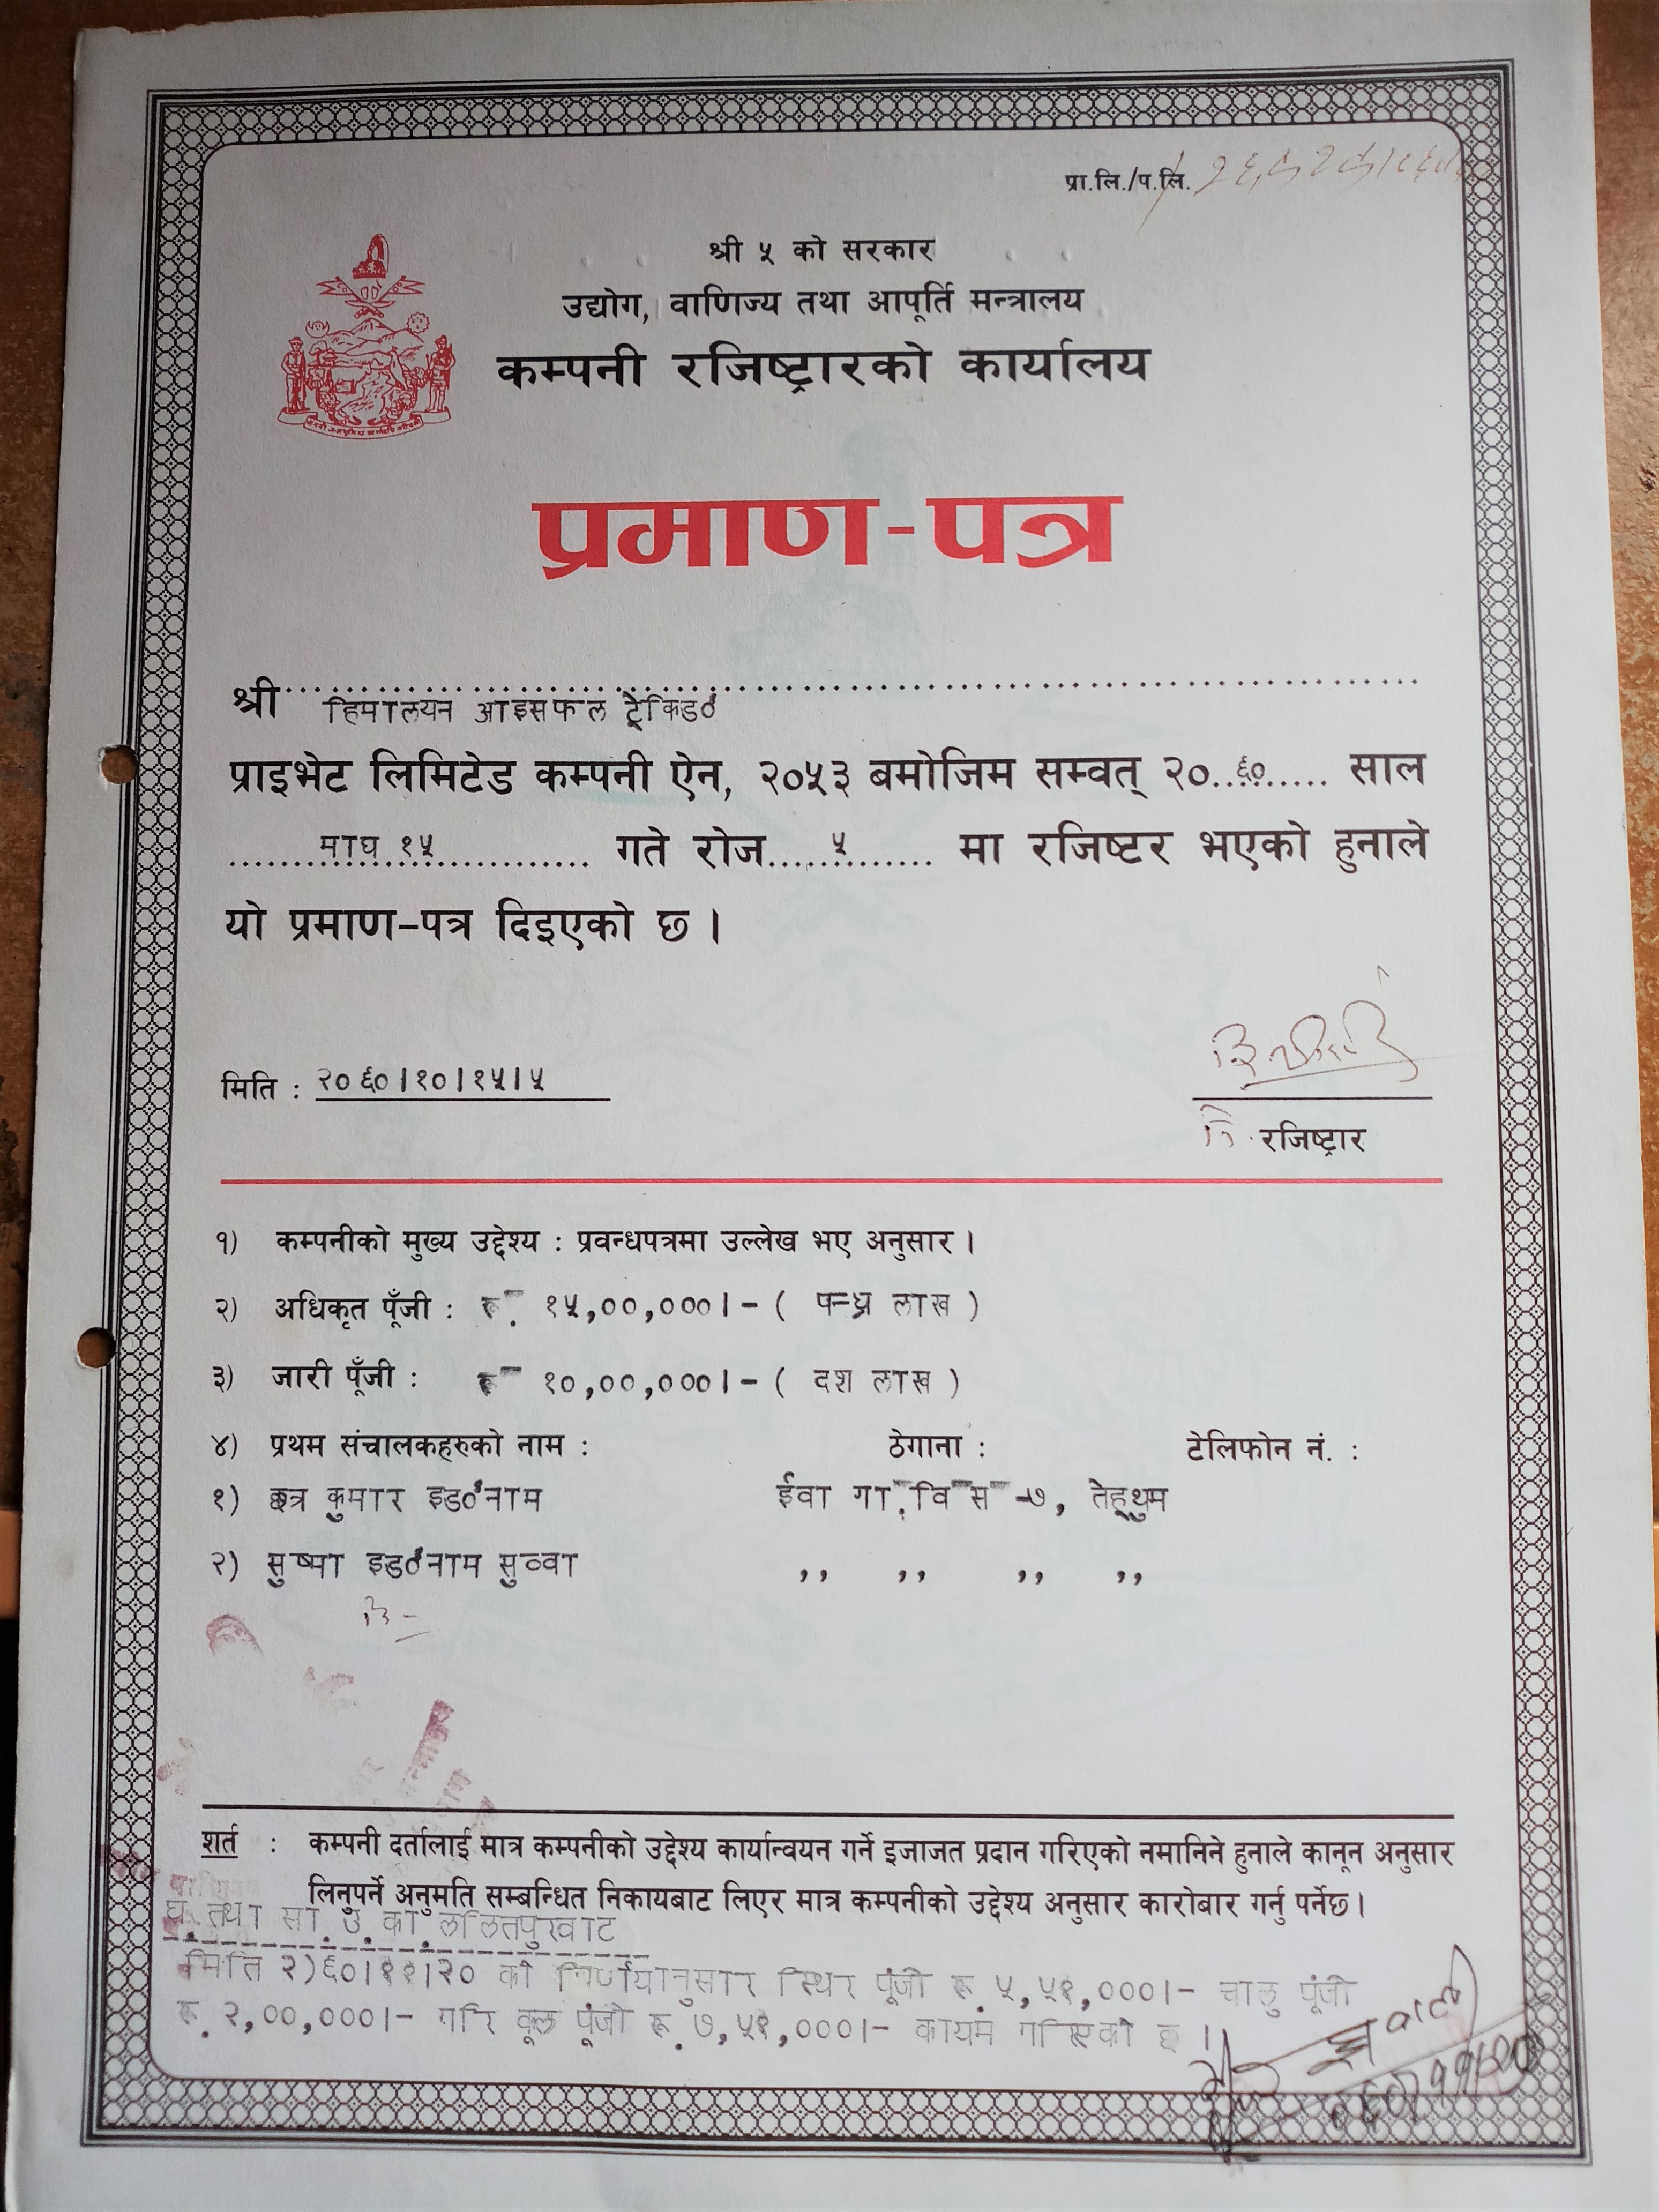 Certiicate from Company register office